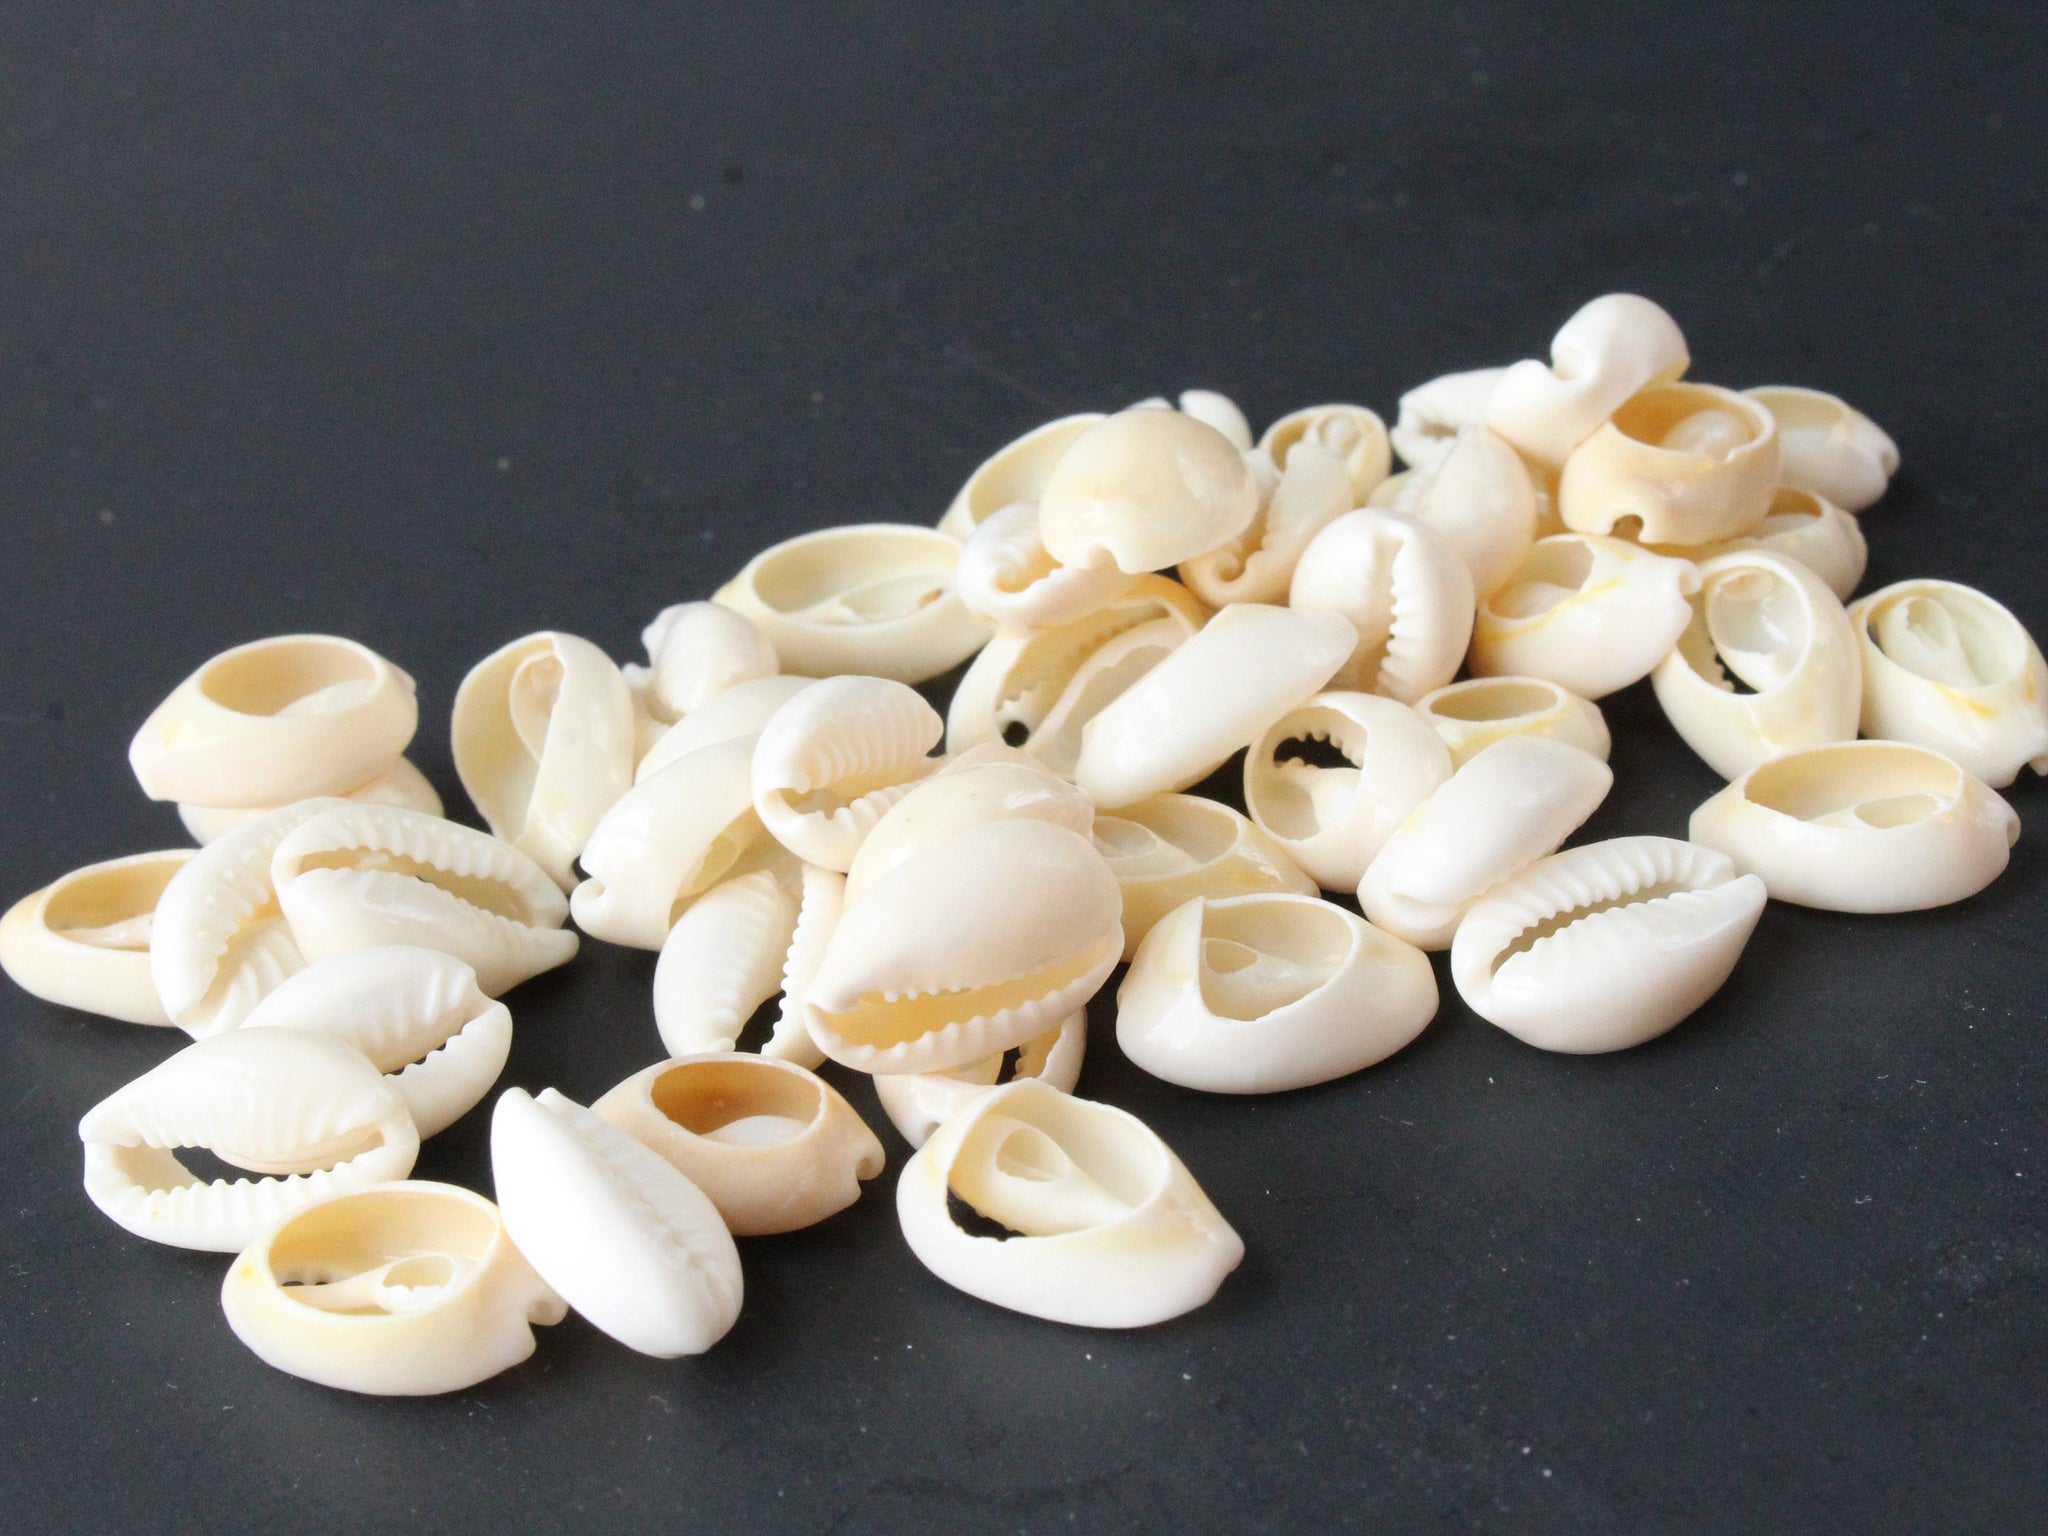 50 Back Cut Cowrie Shell Beads White Natural Seashell Beads